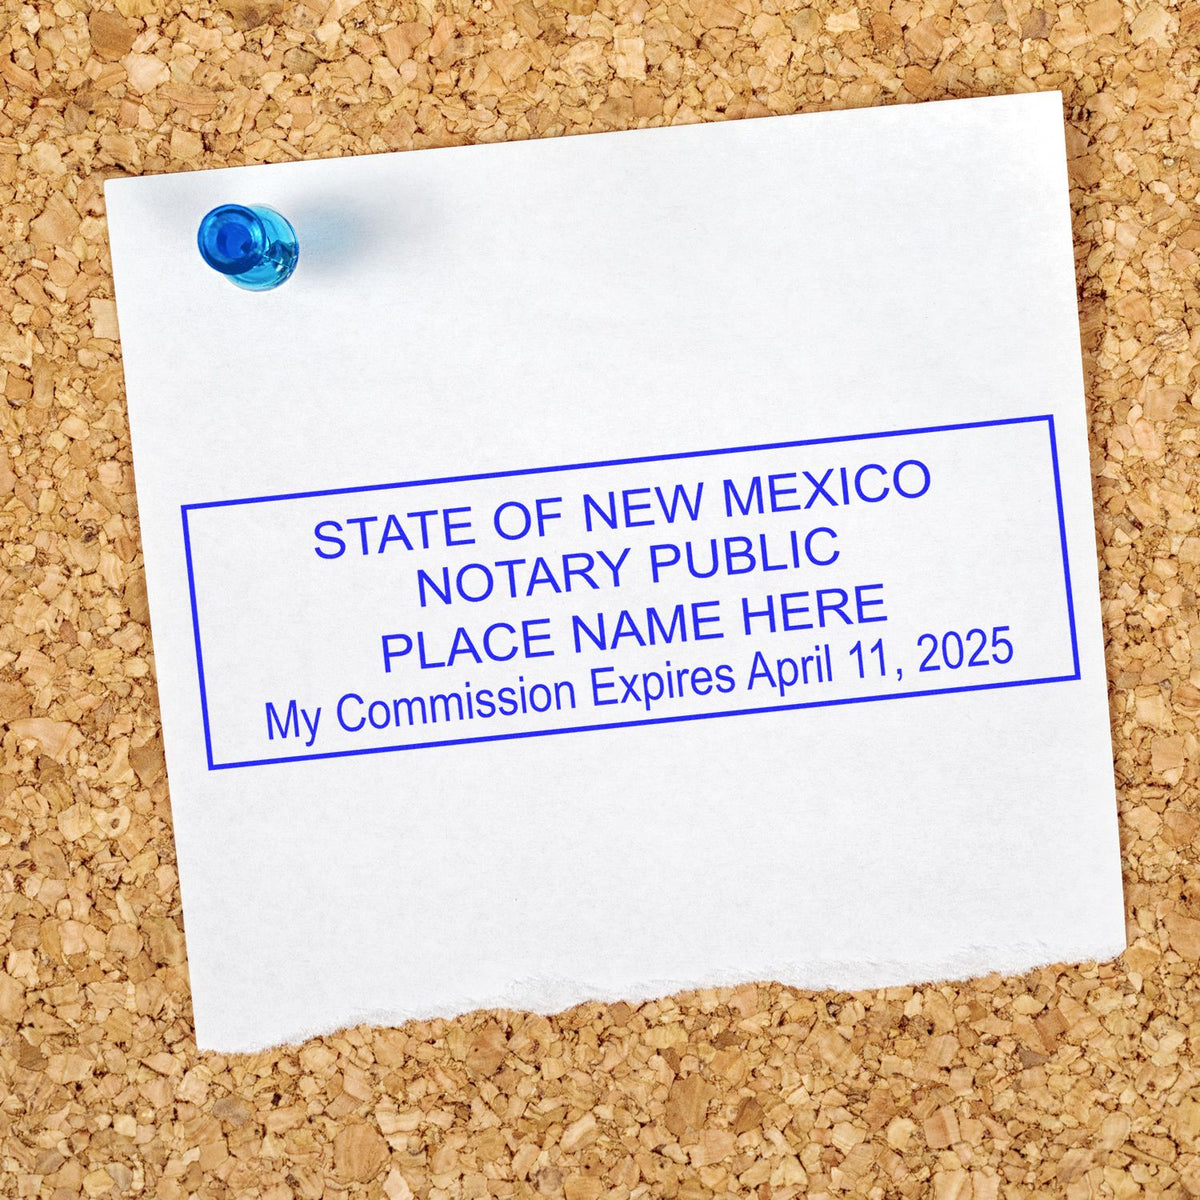 The MaxLight Premium Pre-Inked New Mexico State Seal Notarial Stamp stamp impression comes to life with a crisp, detailed photo on paper - showcasing true professional quality.